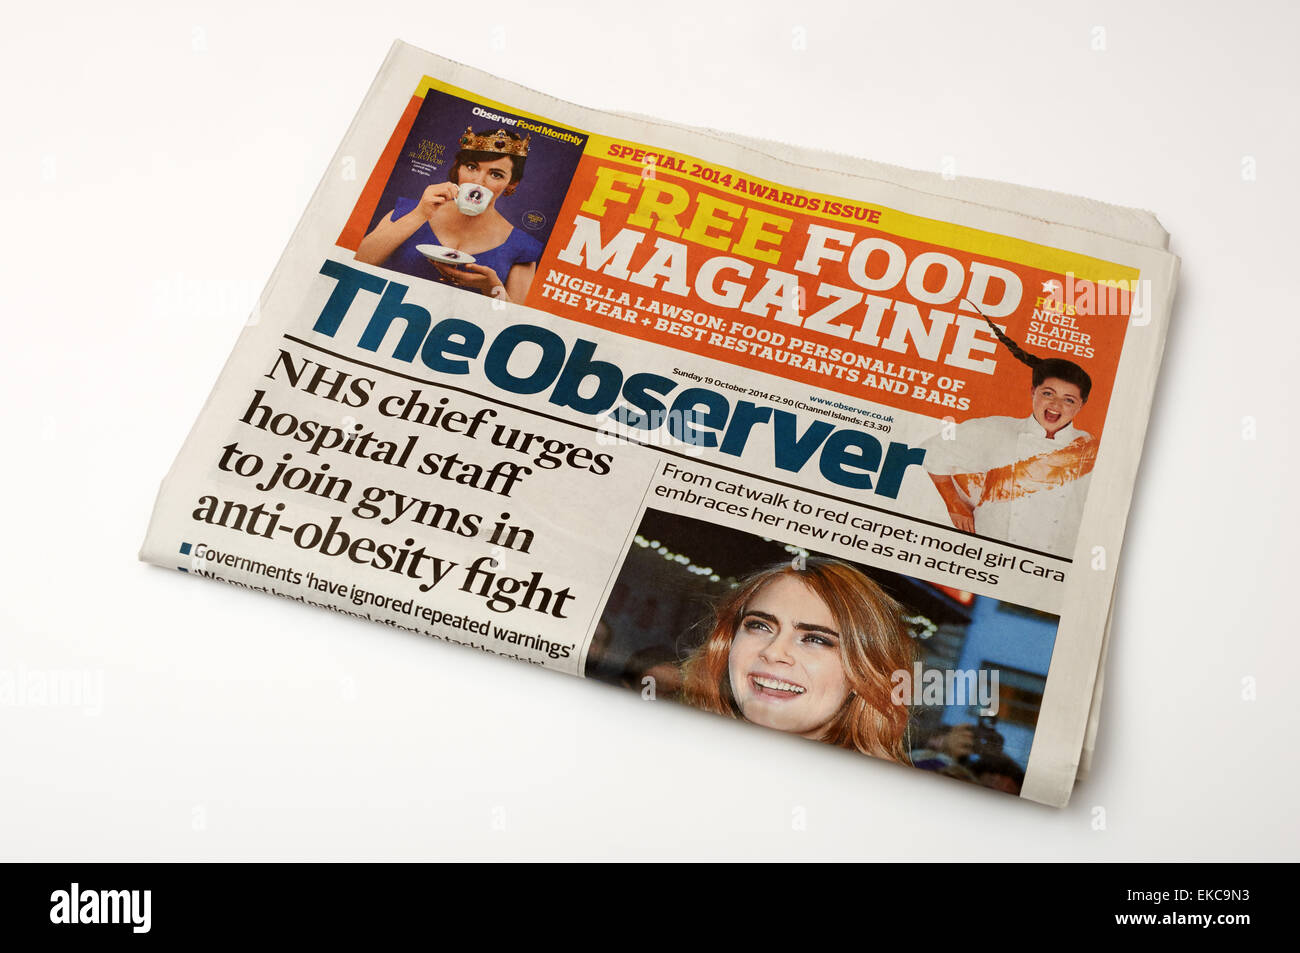 The Observer newspaper with headline NHS chief urges hospital staff to join gyms in anti-obesity fight Stock Photo